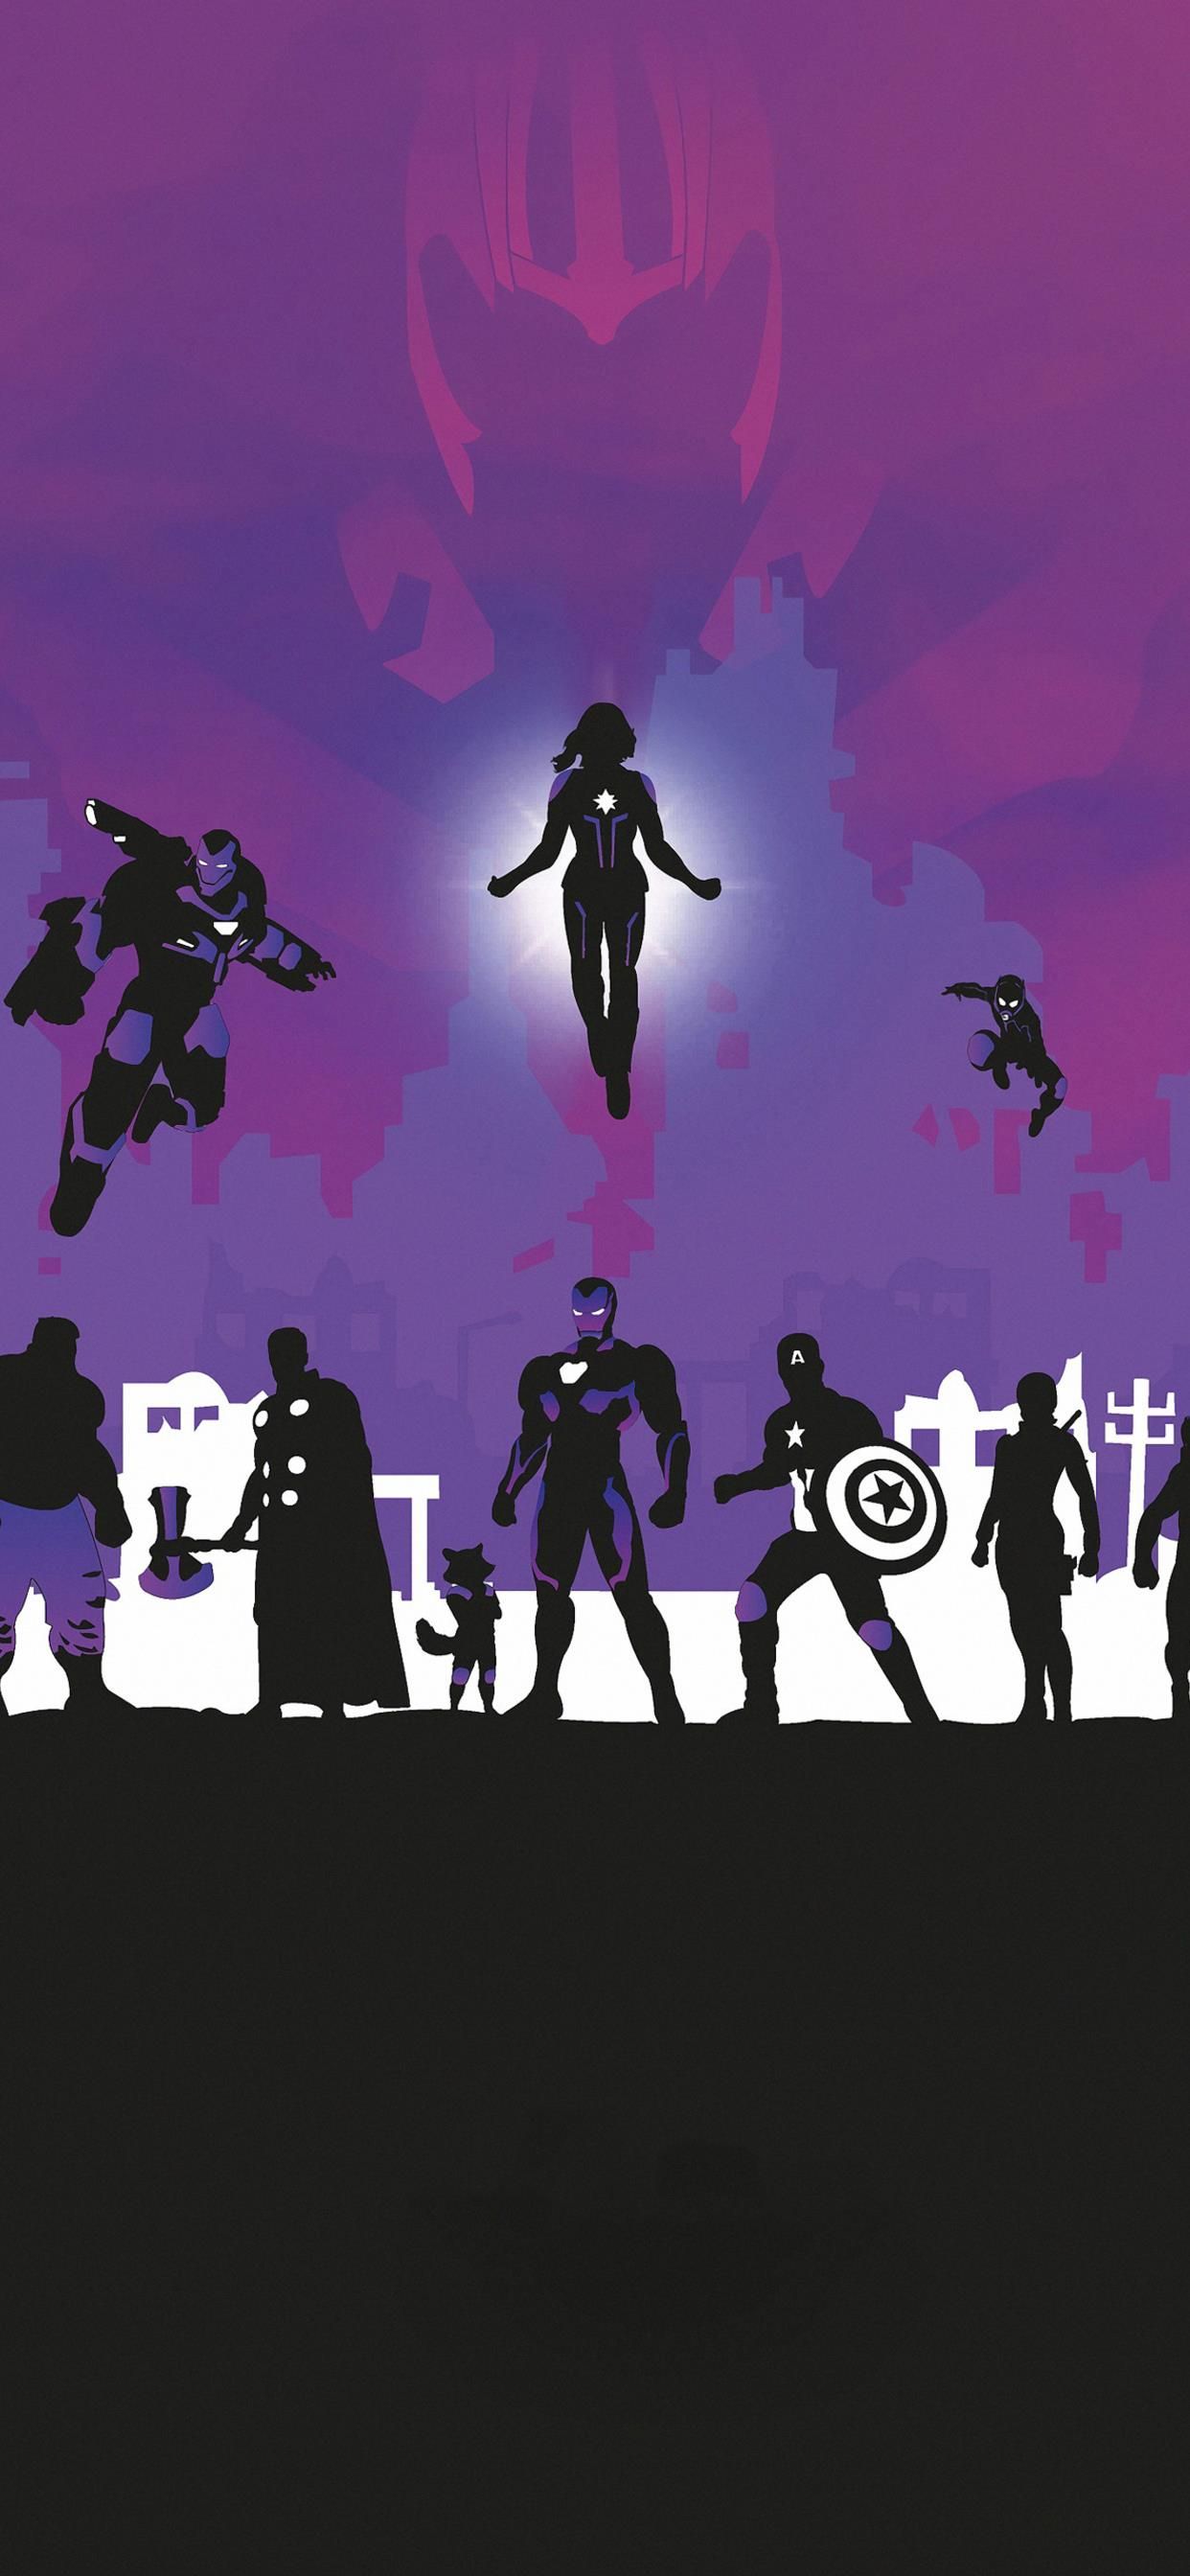 A purple and pink superhero wallpaper with the silhouette of the Avengers team. - Marvel, Avengers